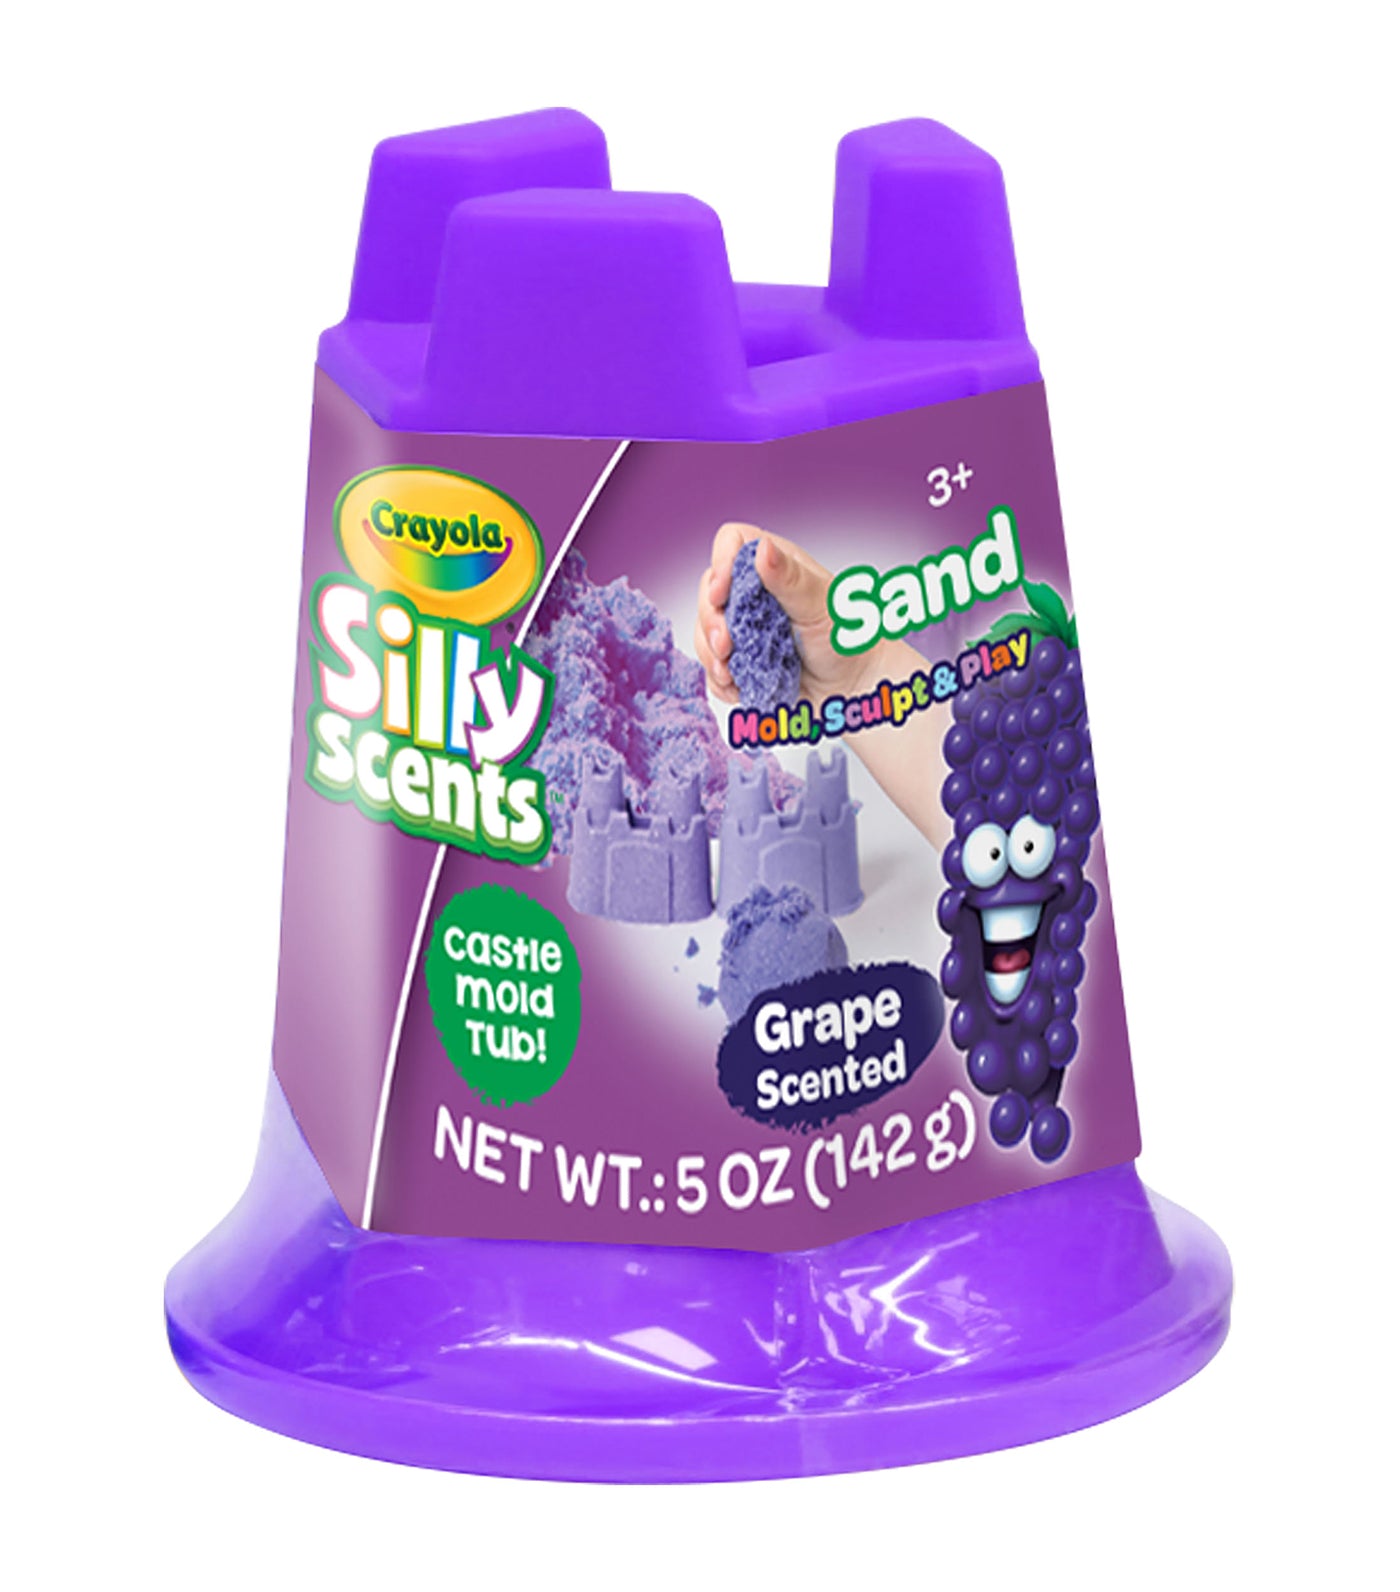 Silly Scents Sand Castle Tub Grapes